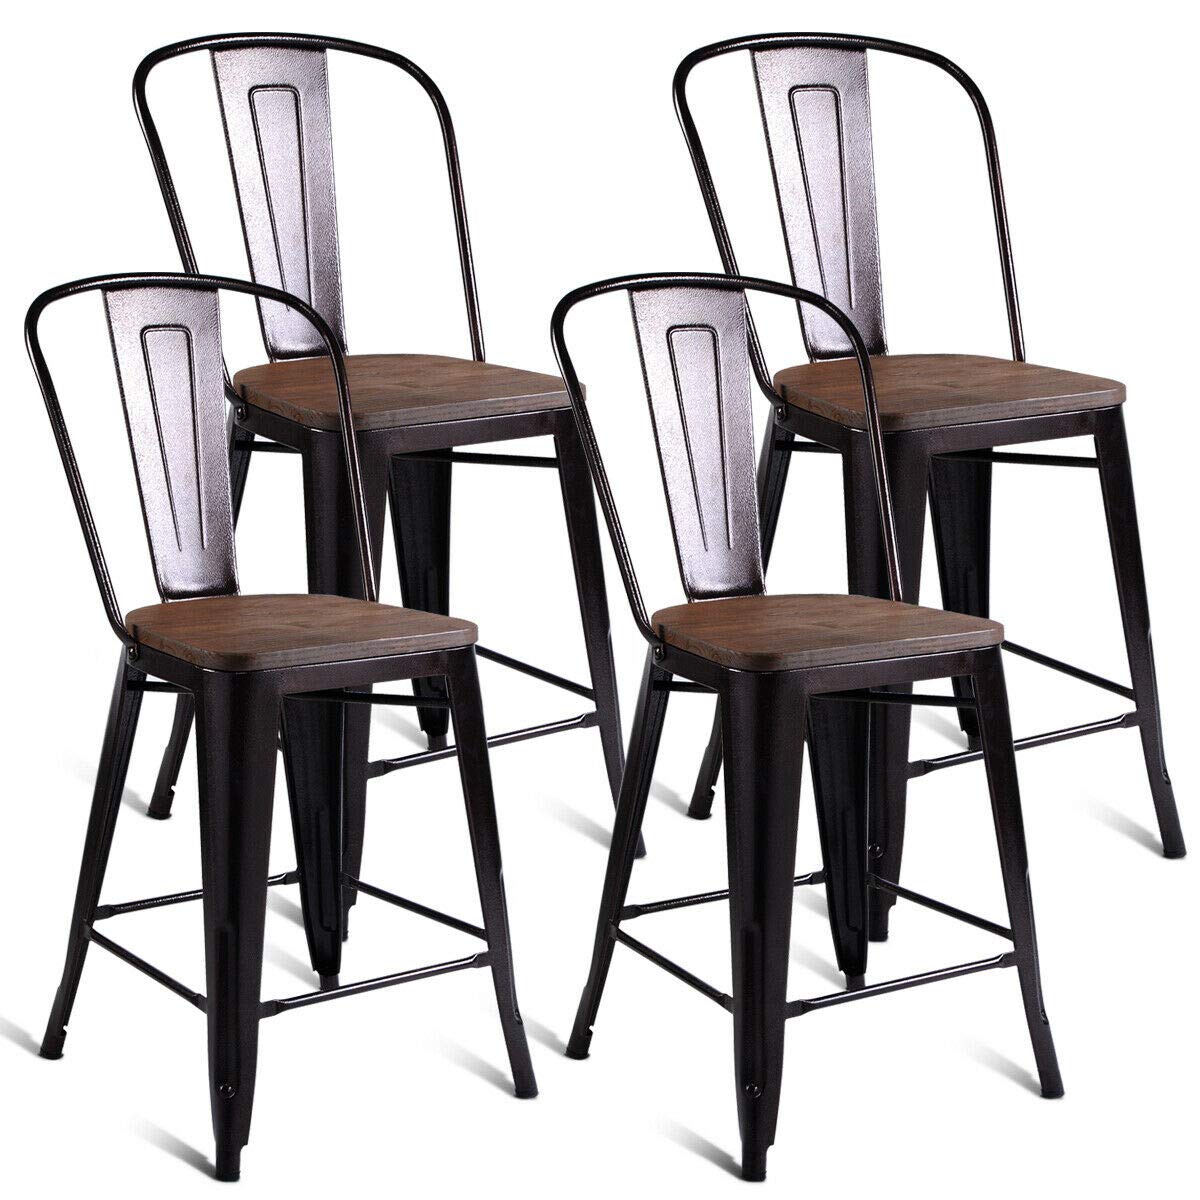 Giantex Tolix Style Dining Stools with Wood Seat and Backrest, Industrial Metal Counter Height Stool